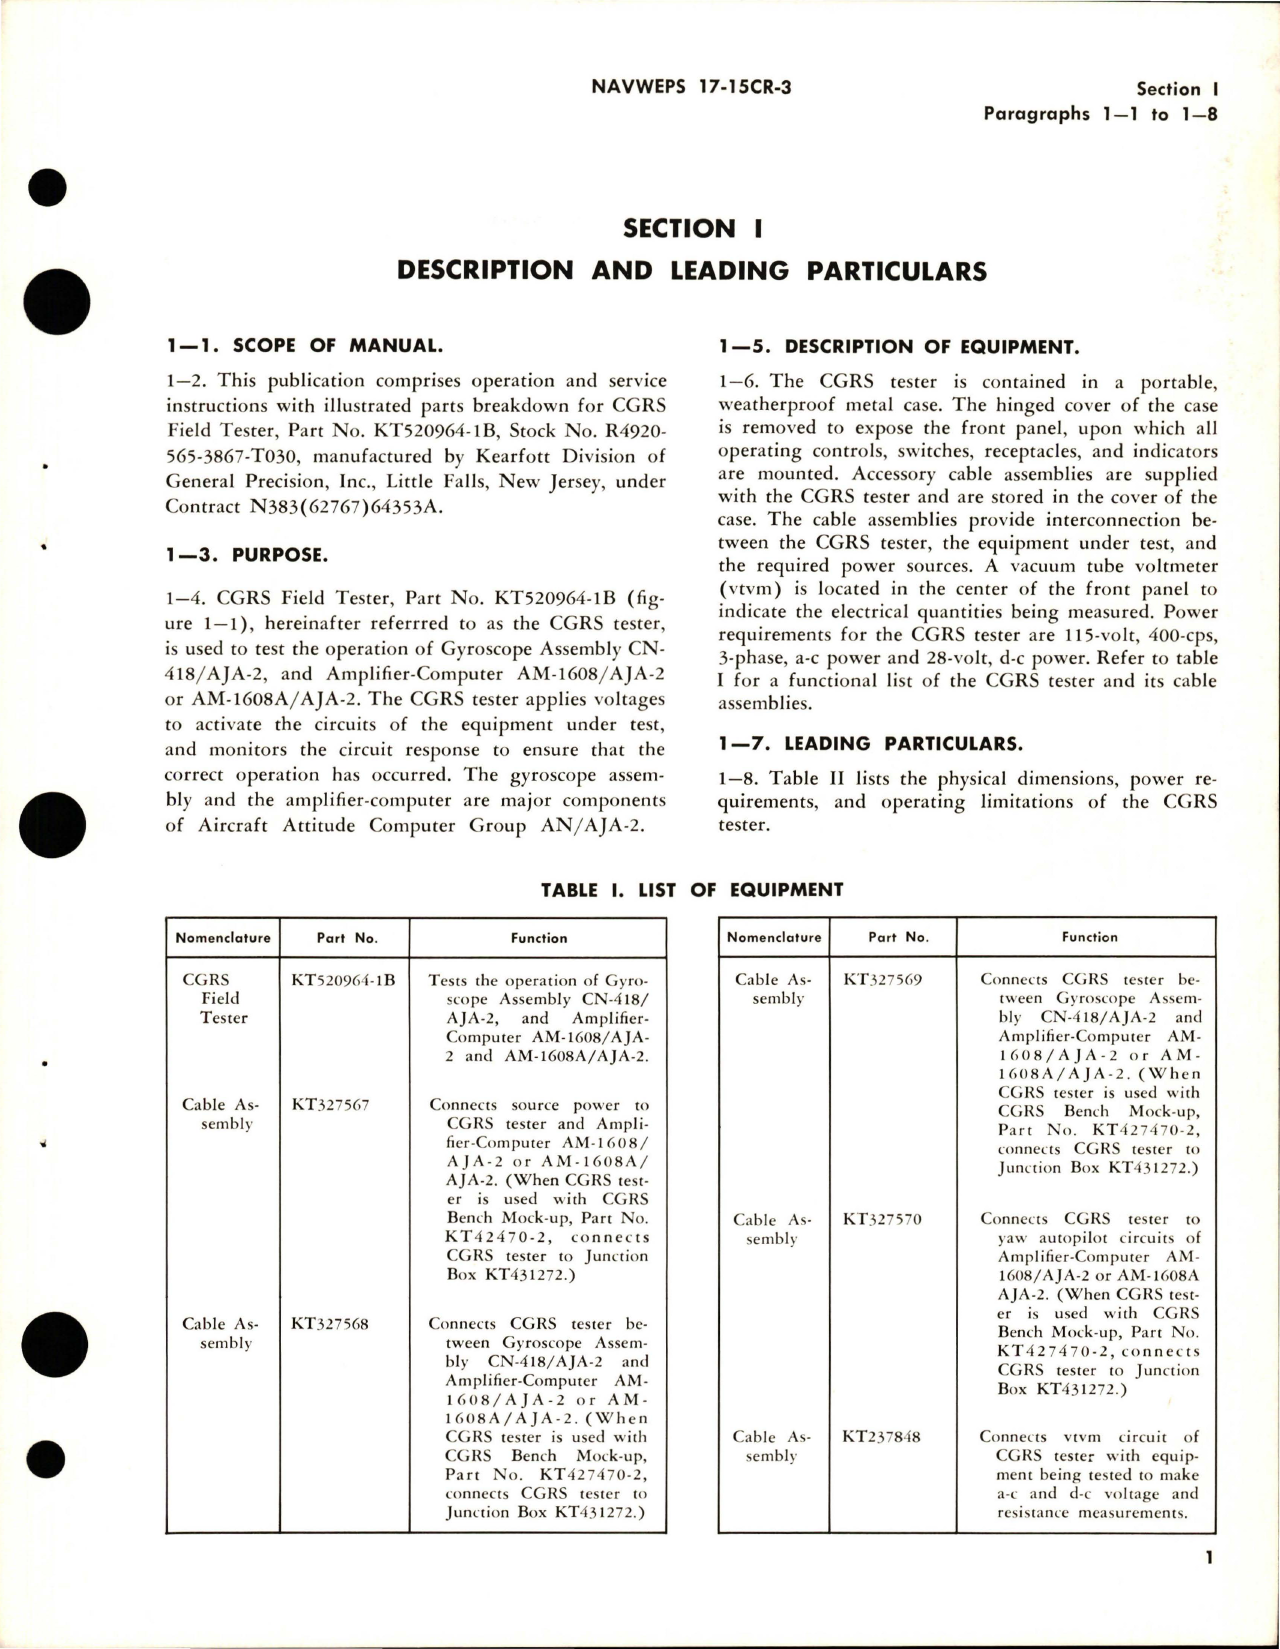 Sample page 7 from AirCorps Library document: Operation and Service Instructions with Illustrated Parts Breakdown for CGRS Field Tester - Part KT520964-1B